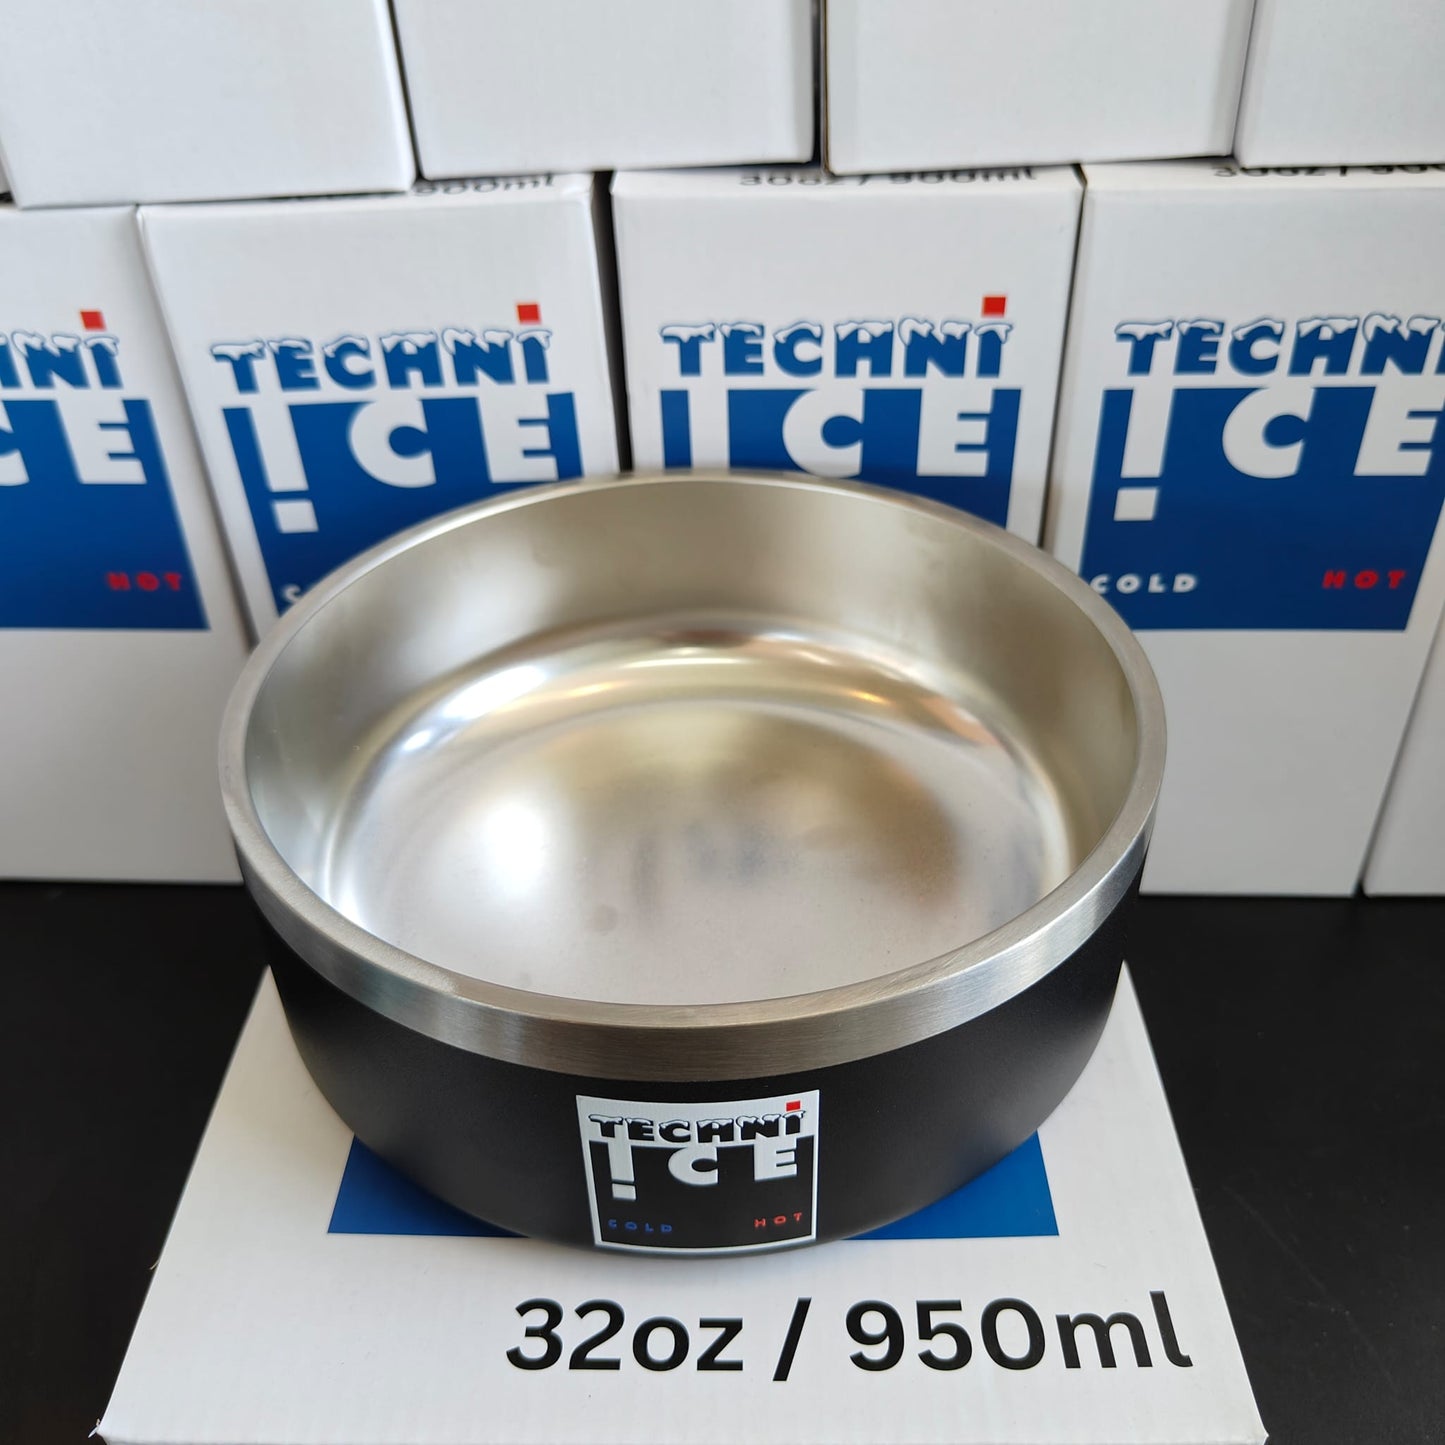 New 2024 Model Techni Ice 950ml (32 oz.) Dog Bowl Black Stainless Steel 6 Years Warranty *FRESH STOCK JUST ARRIVED